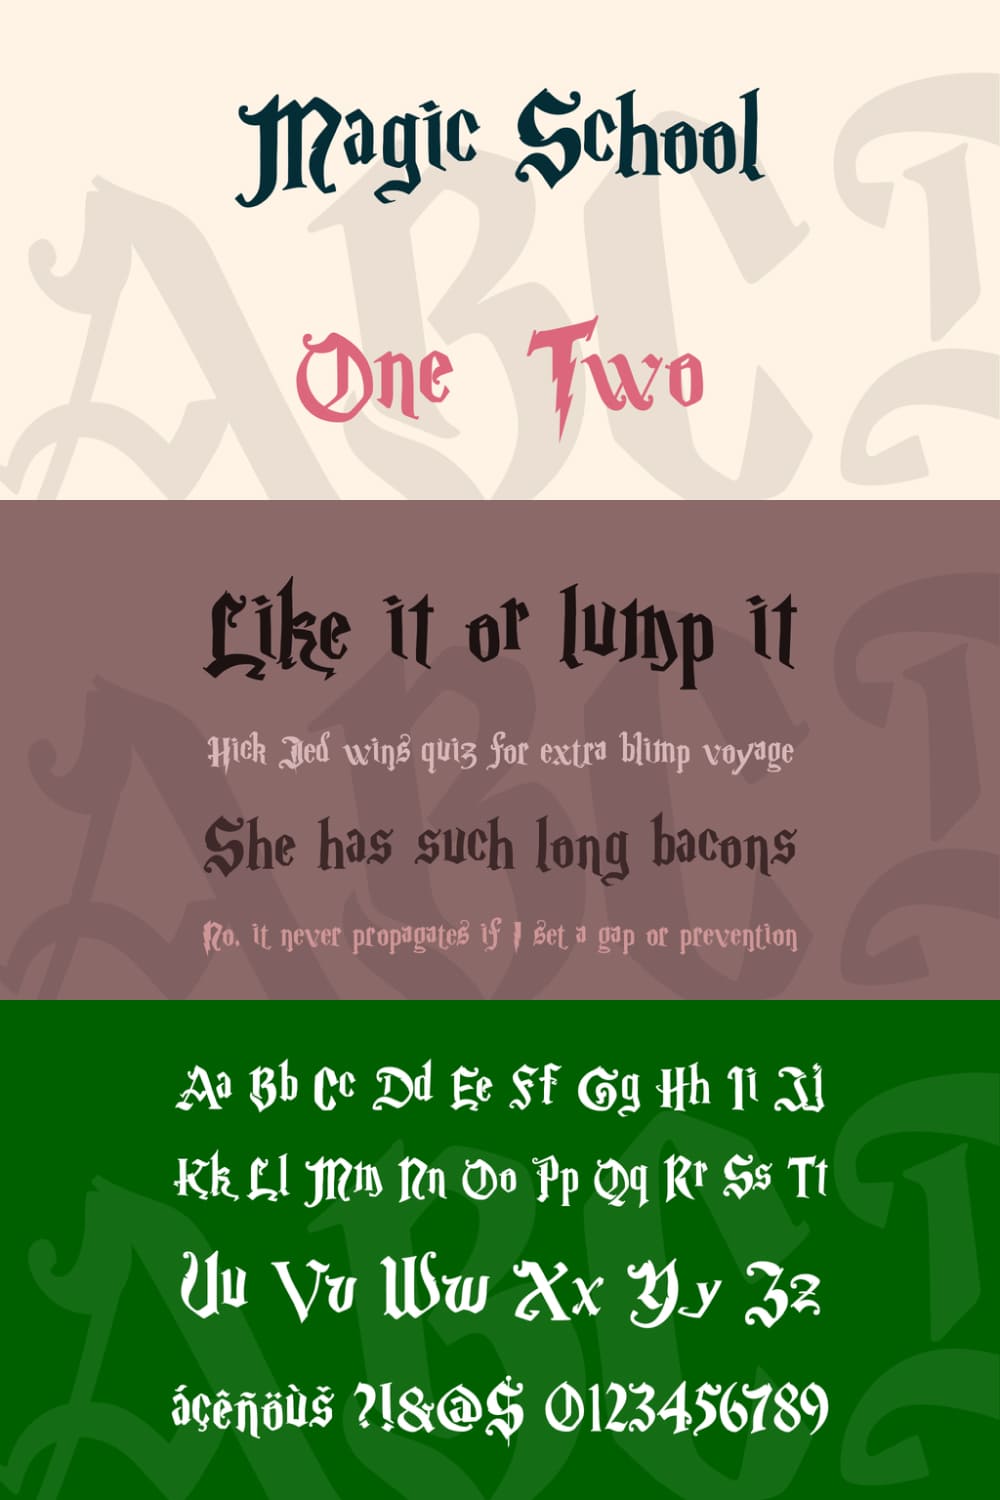 Magic font for the banner of the school of wizards.